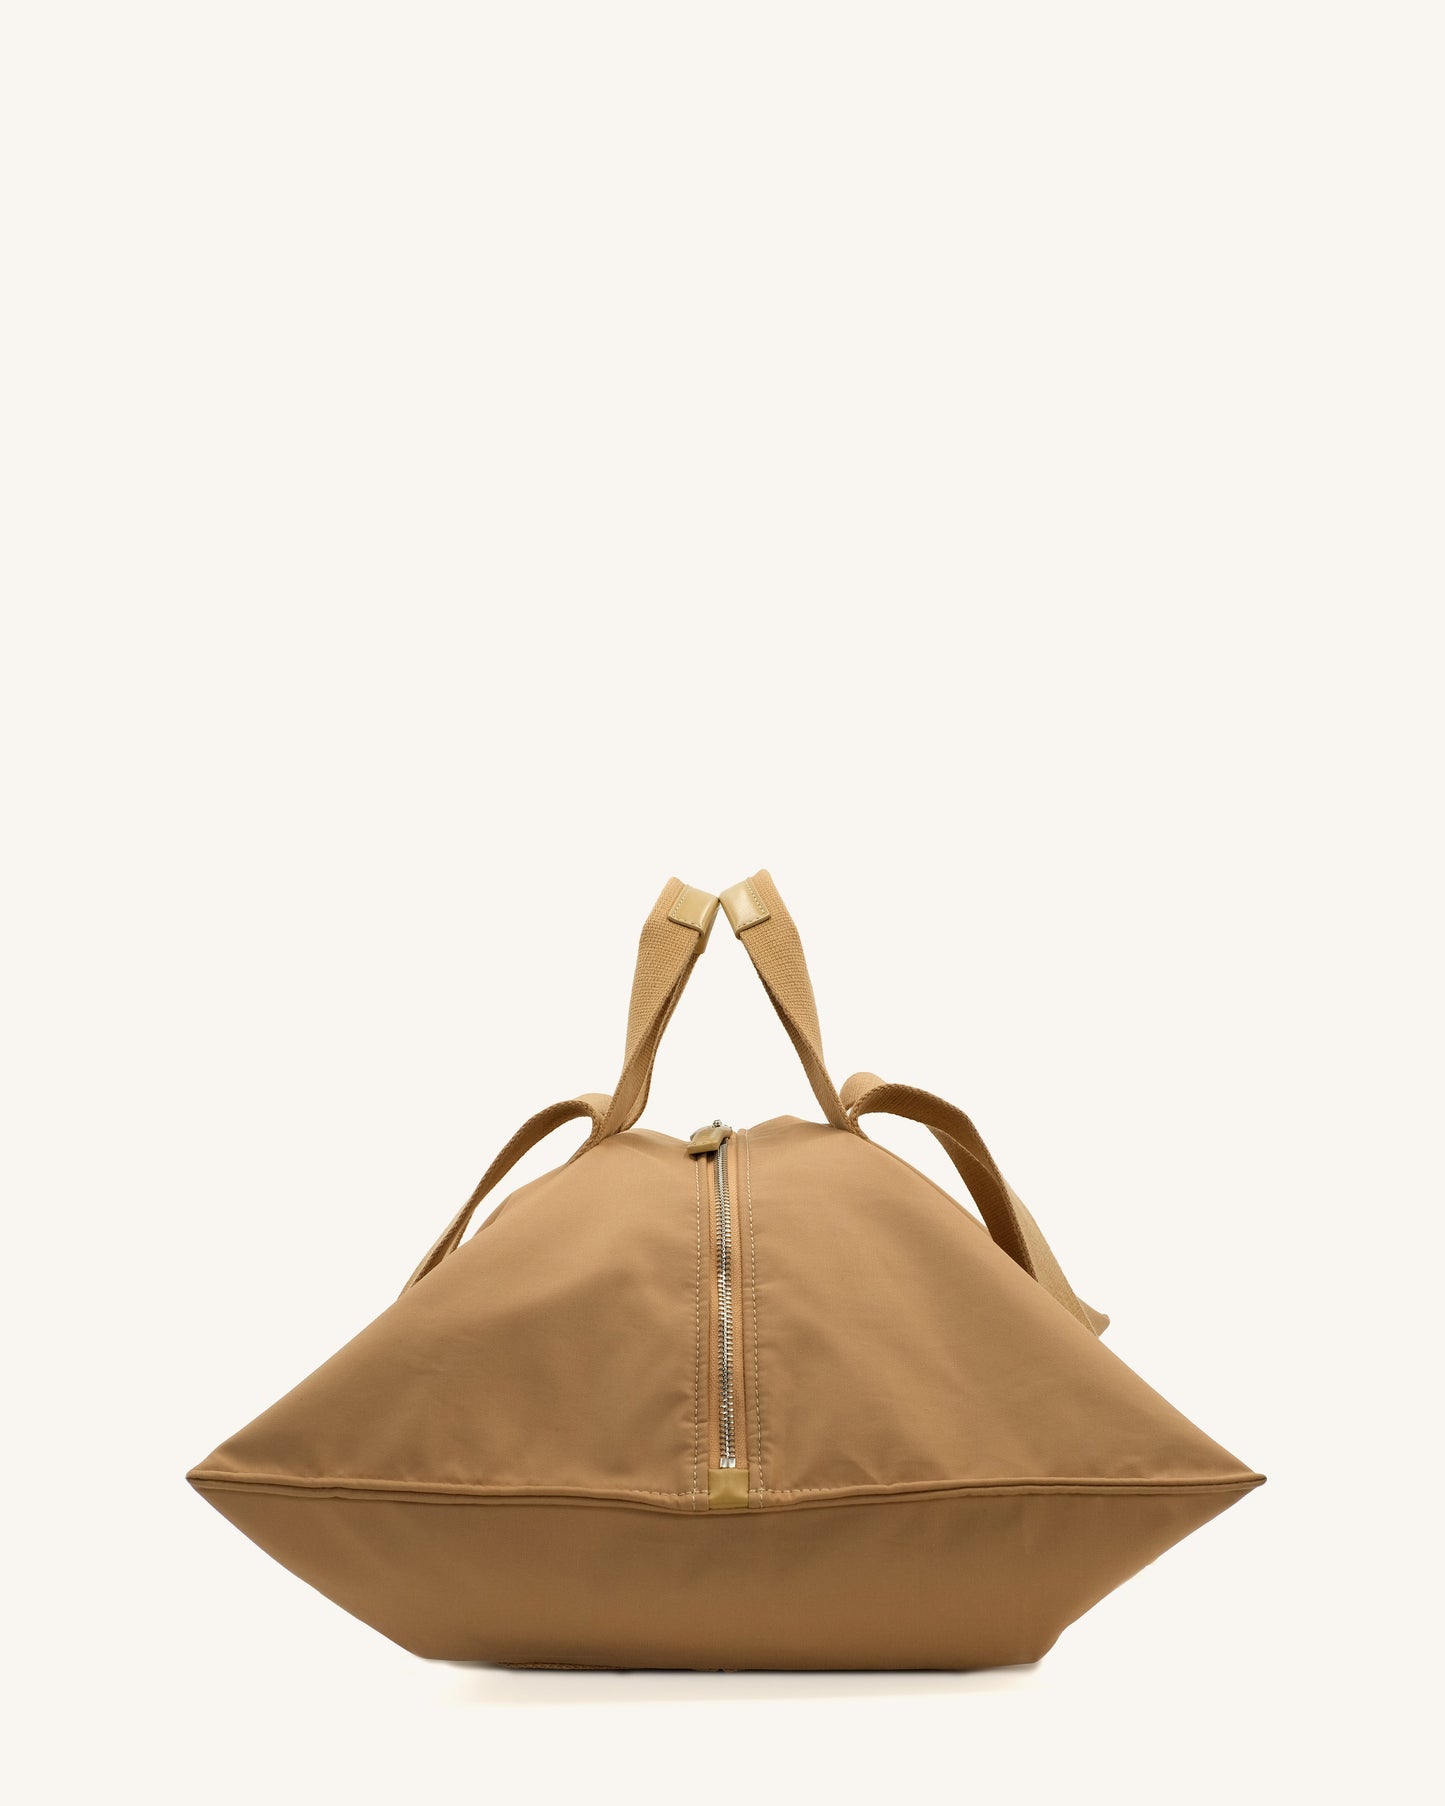 SAMPLE SALE:  On Tour Duffle - Toffee